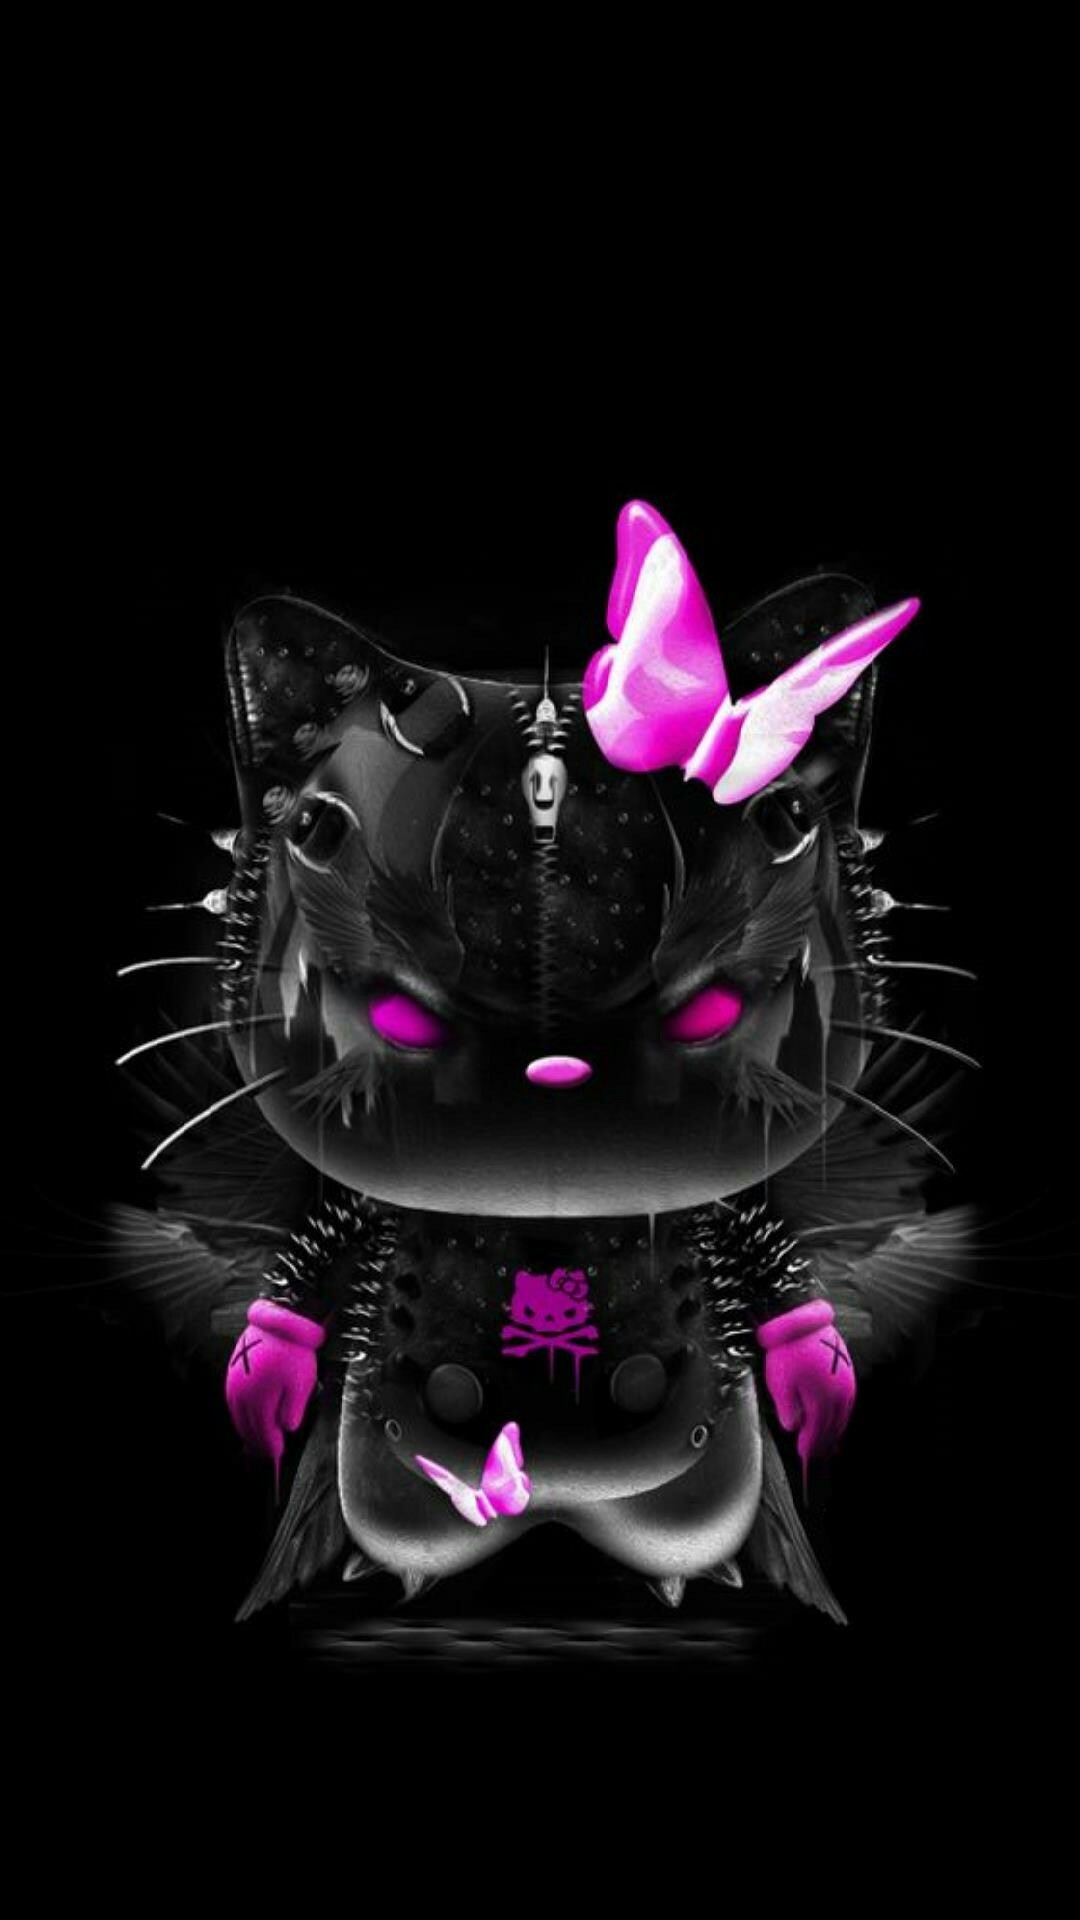 1080x1920 1920x1080 Pink And Black Hello Kitty Backgrounds - Wallpaper Cave